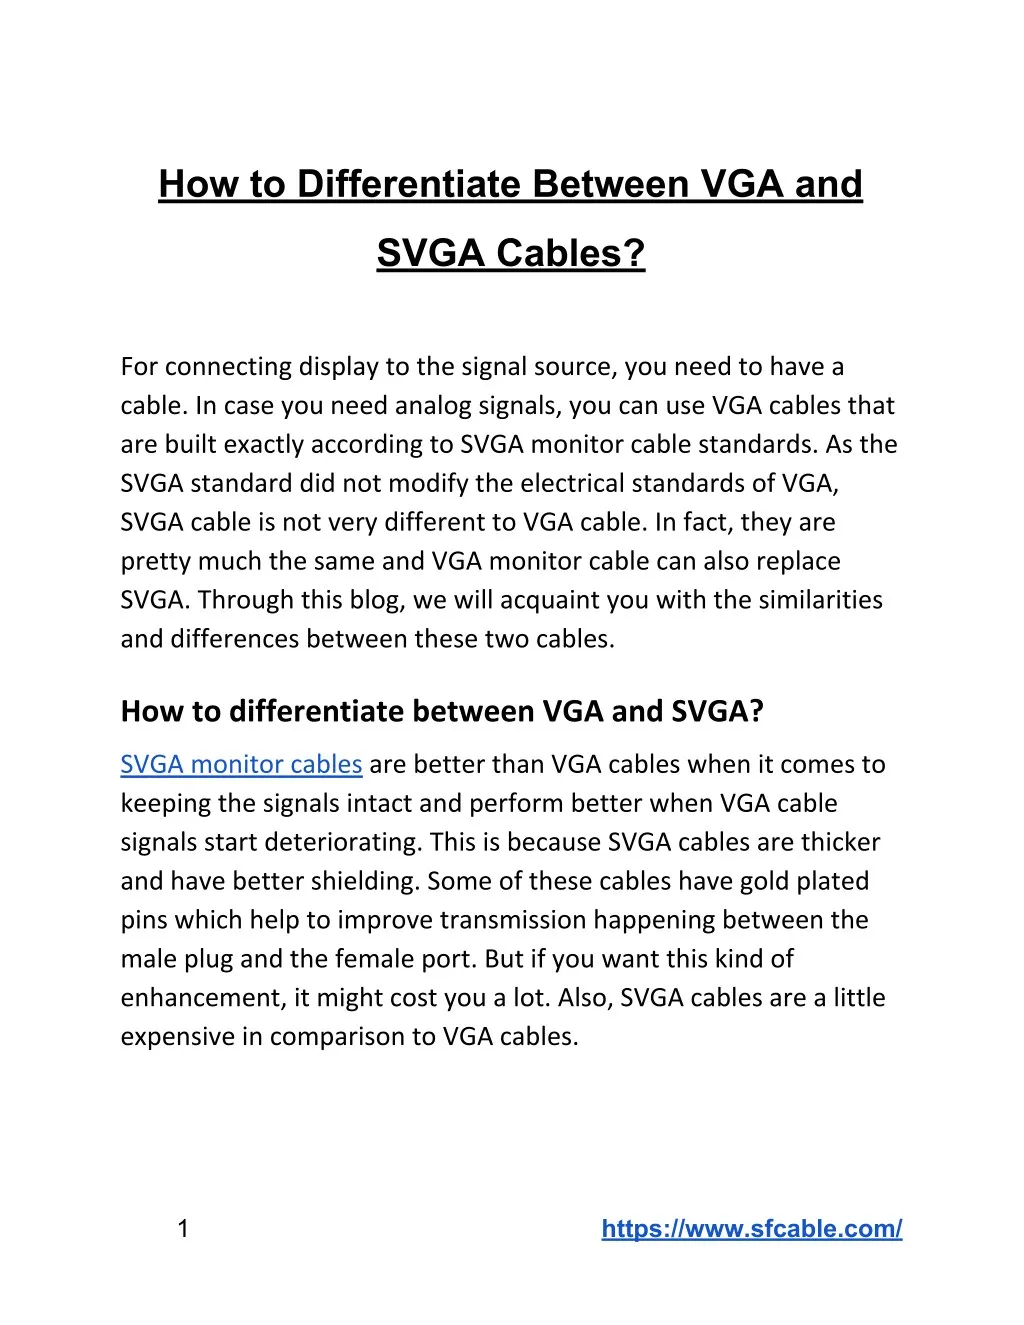 how to differentiate between vga and